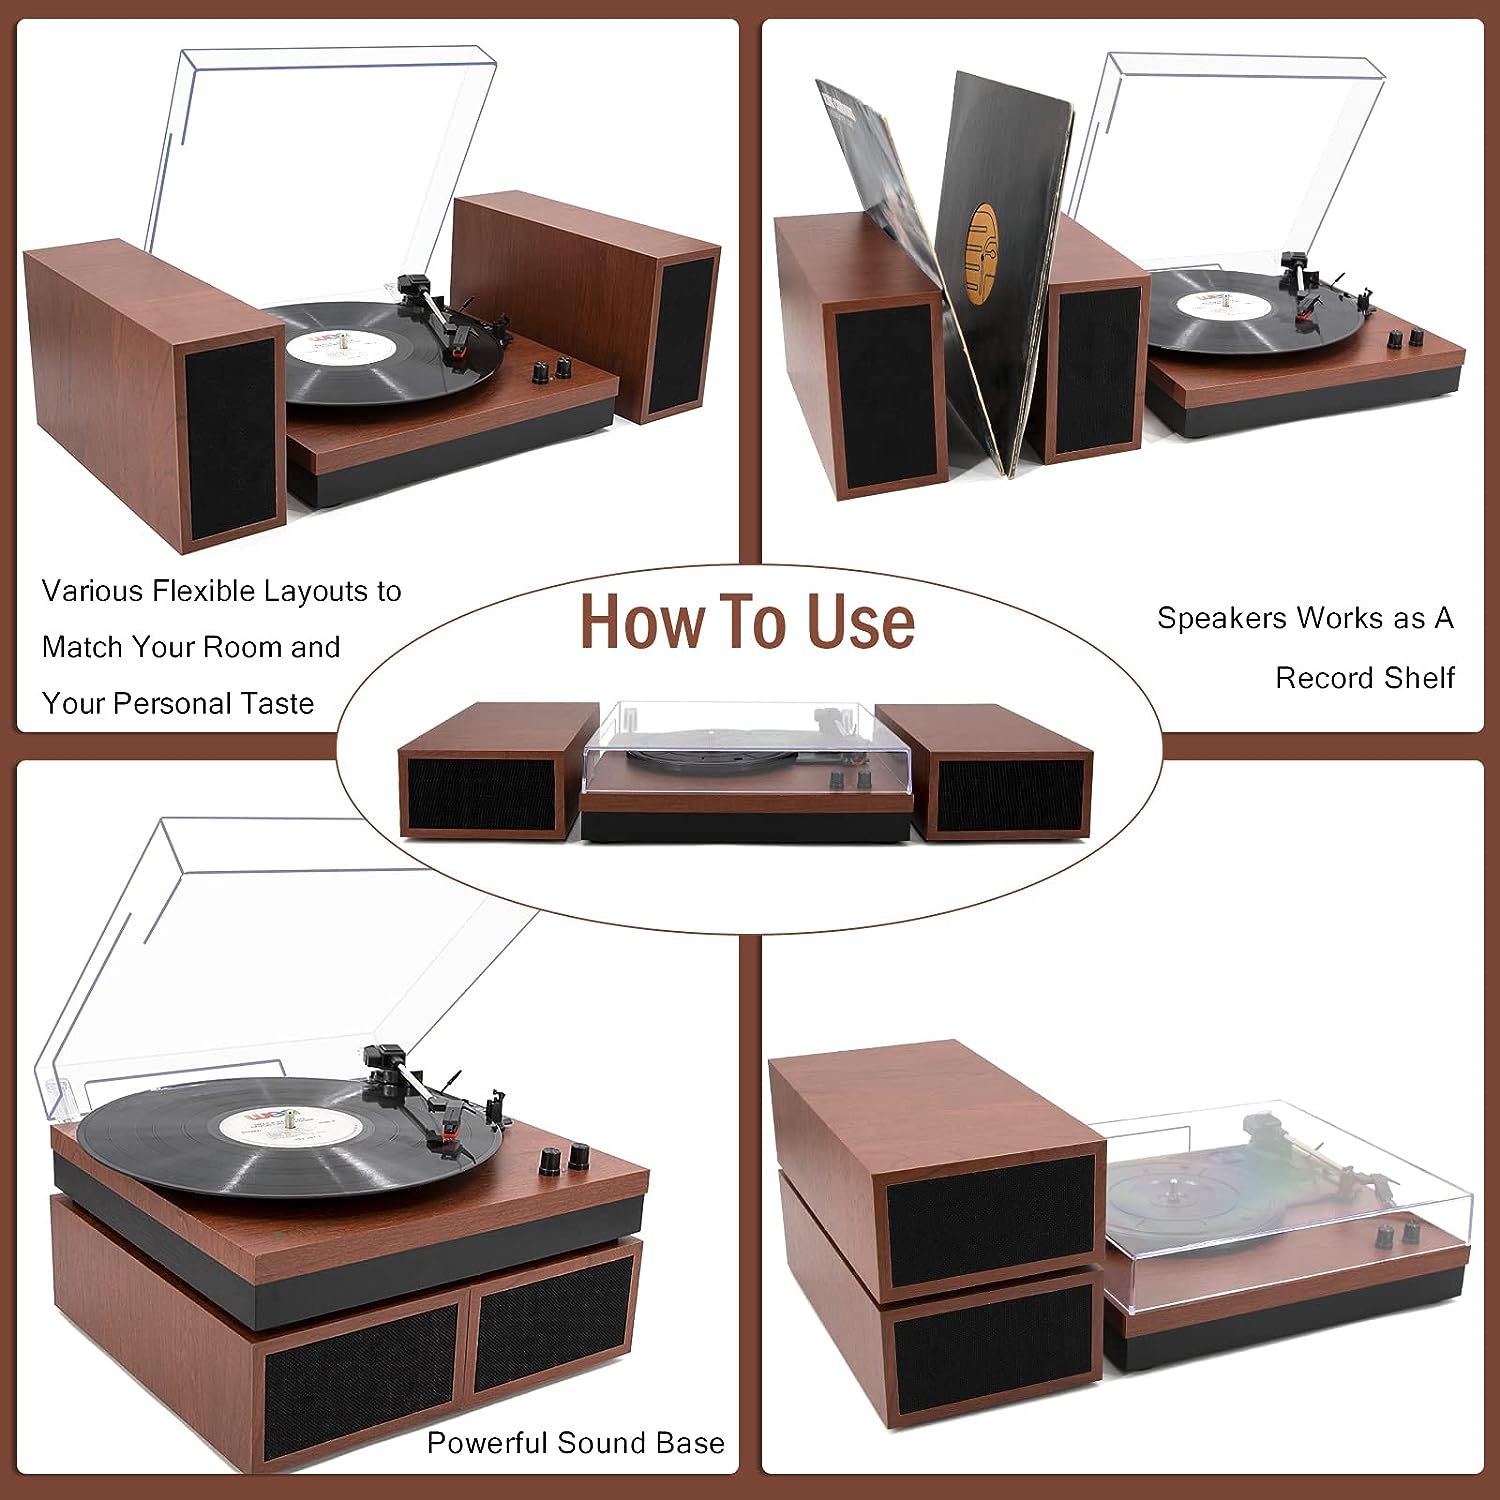 LP&No.1 Bluetooth Vinyl Record Player with External Speakers, 3-Speed Belt-Drive Turntable for Vinyl Albums with Auto Off and Bluetooth Input, Yellow Wood